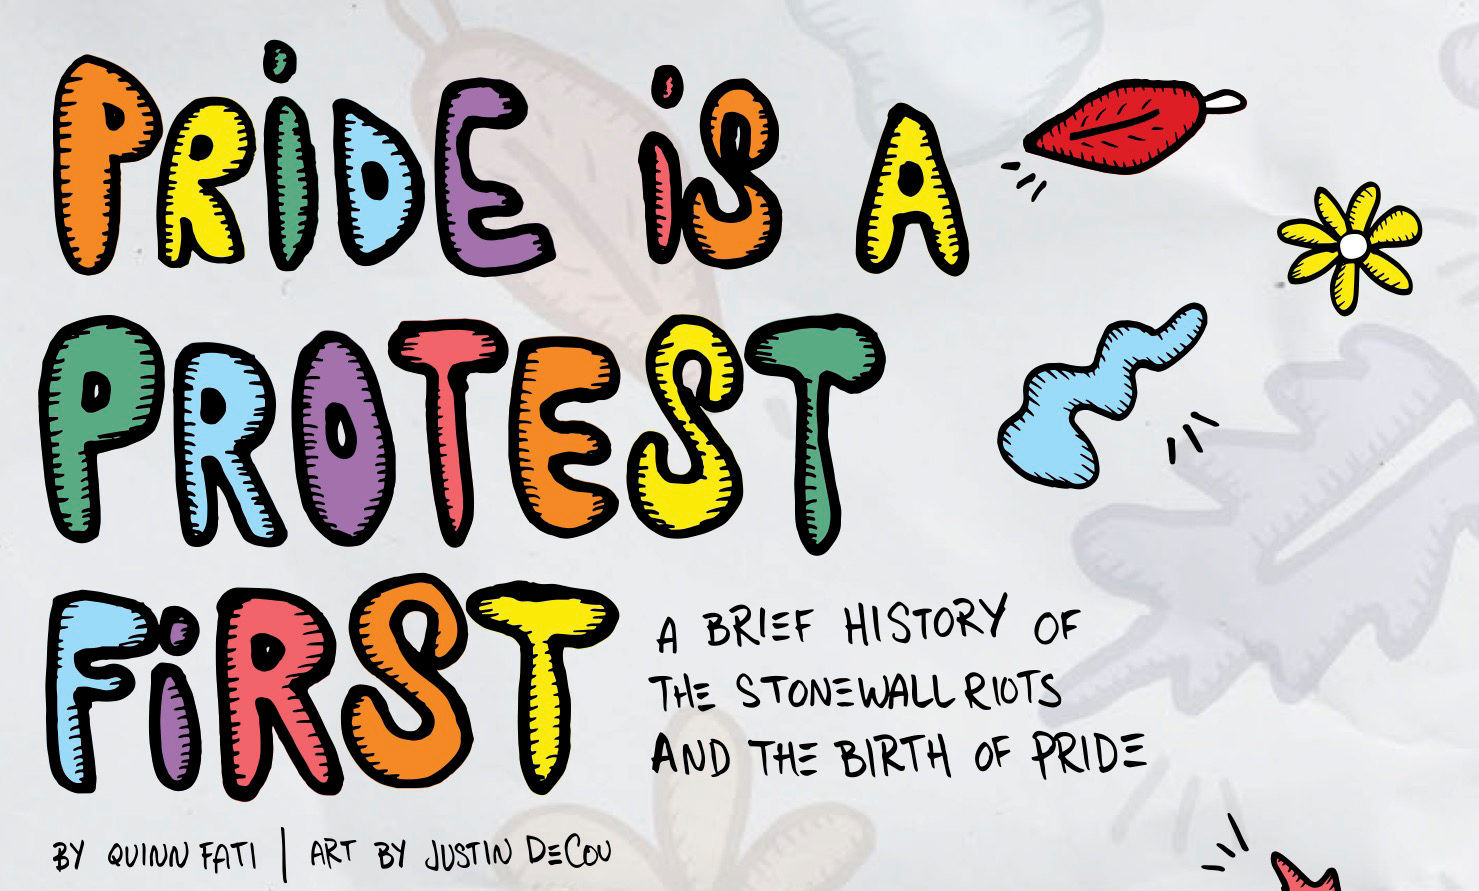 Pride Is A Protest by Quinn Fati Art by Justin DeCou